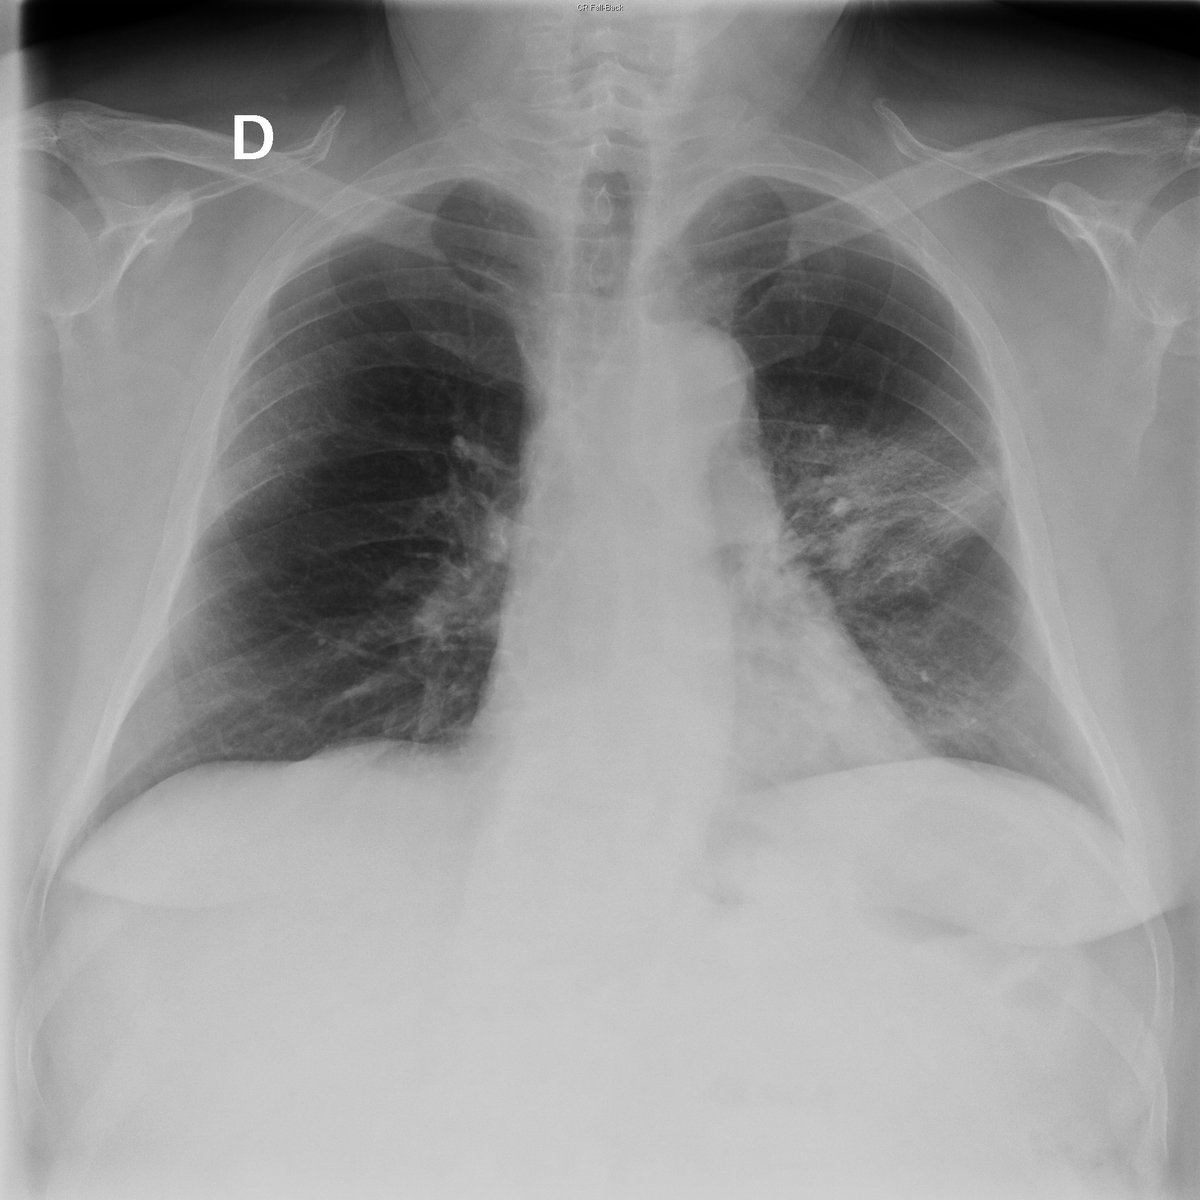 Case 49. 66yo male. Cough and fever. Previous normal CXR (year 2005) and actual. Evident opacity in the left middle lung field and subtle in LLL and RUP.